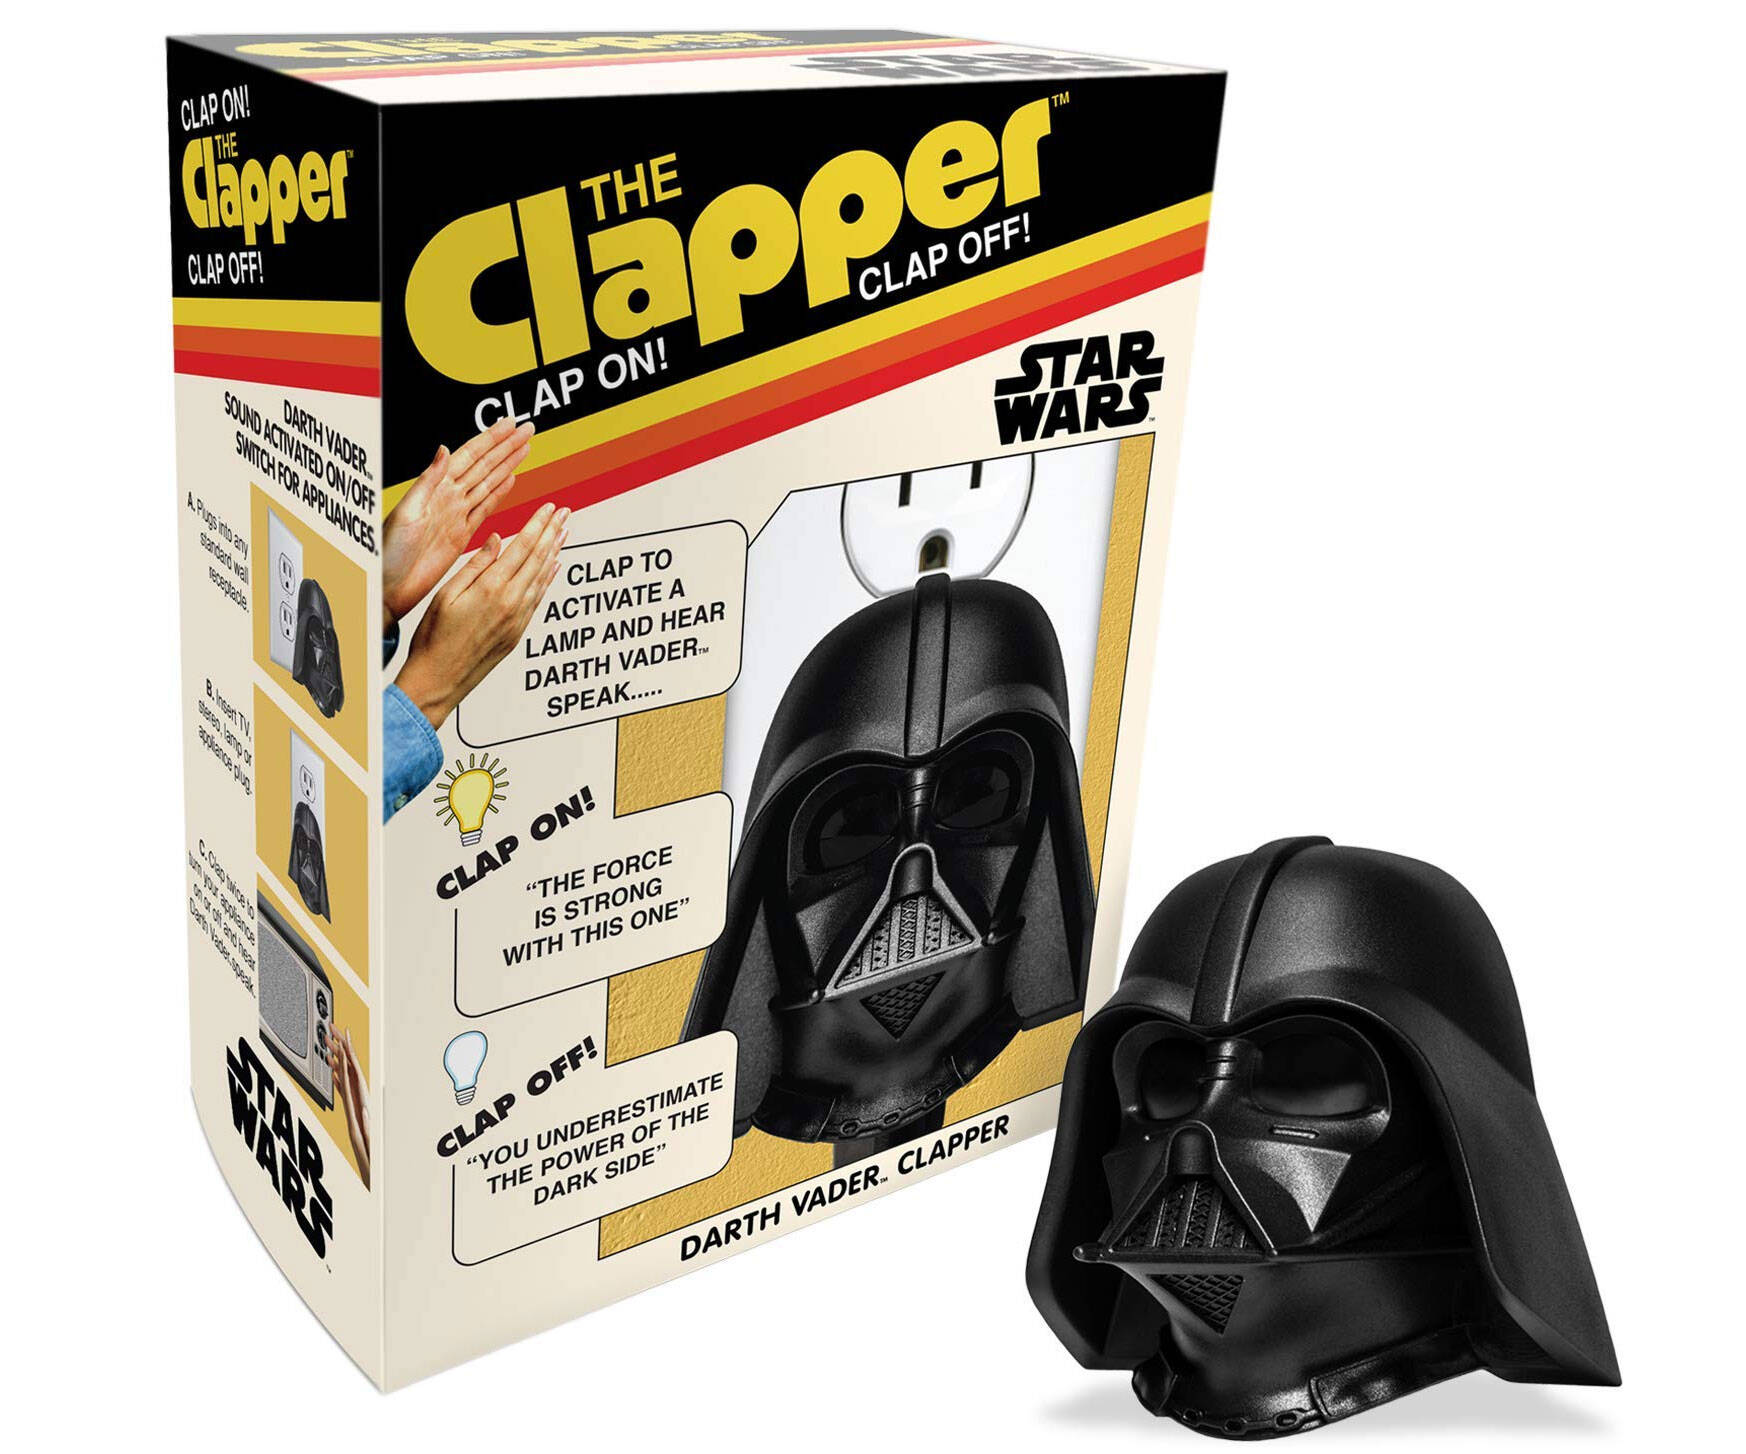 Darth Vader Clapper - //coolthings.us